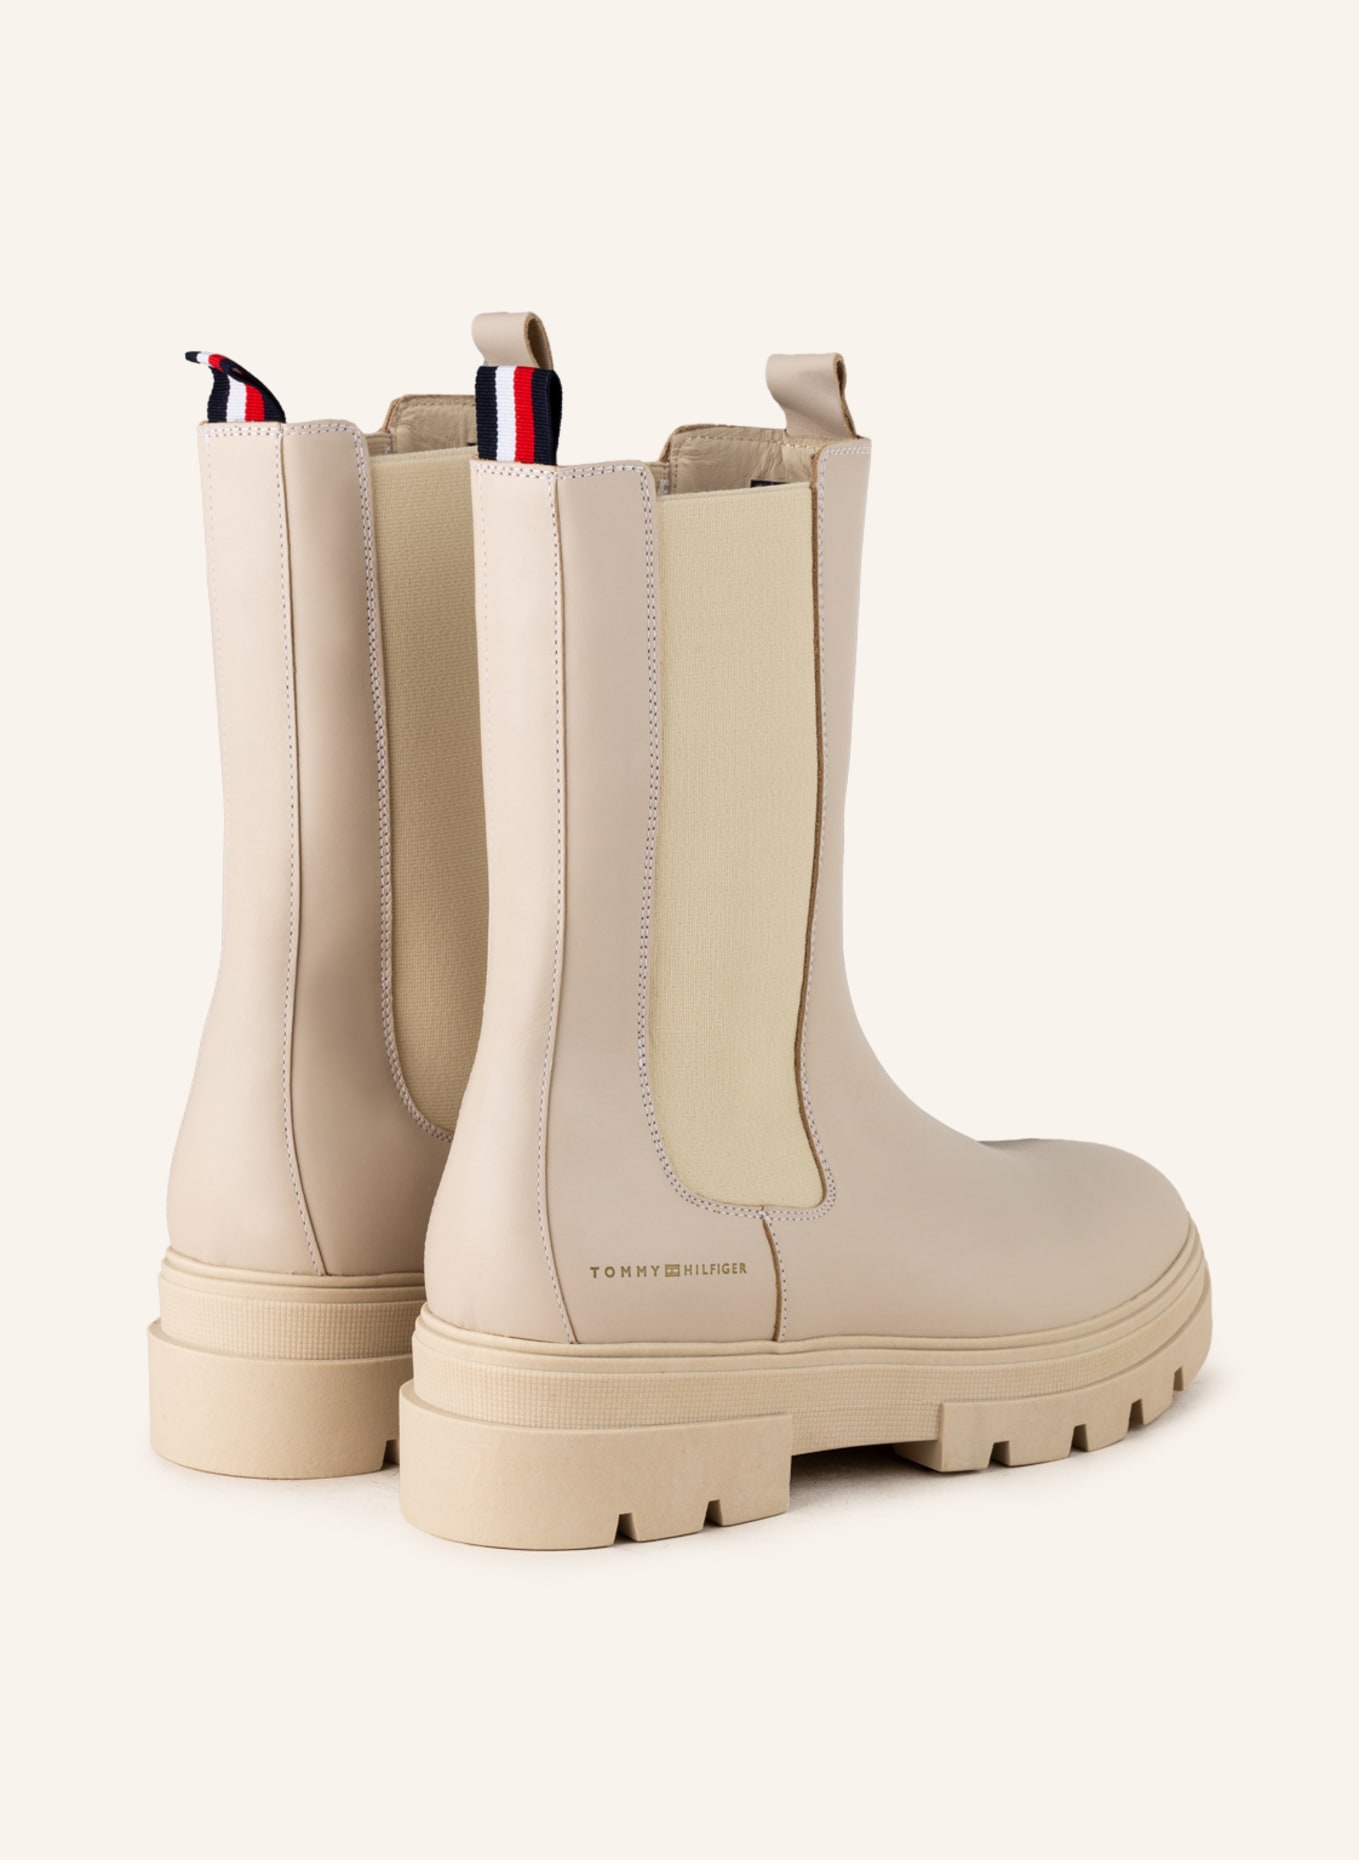 TOMMY HILFIGER Chelsea-Boots, Farbe: CREME (Bild 2)